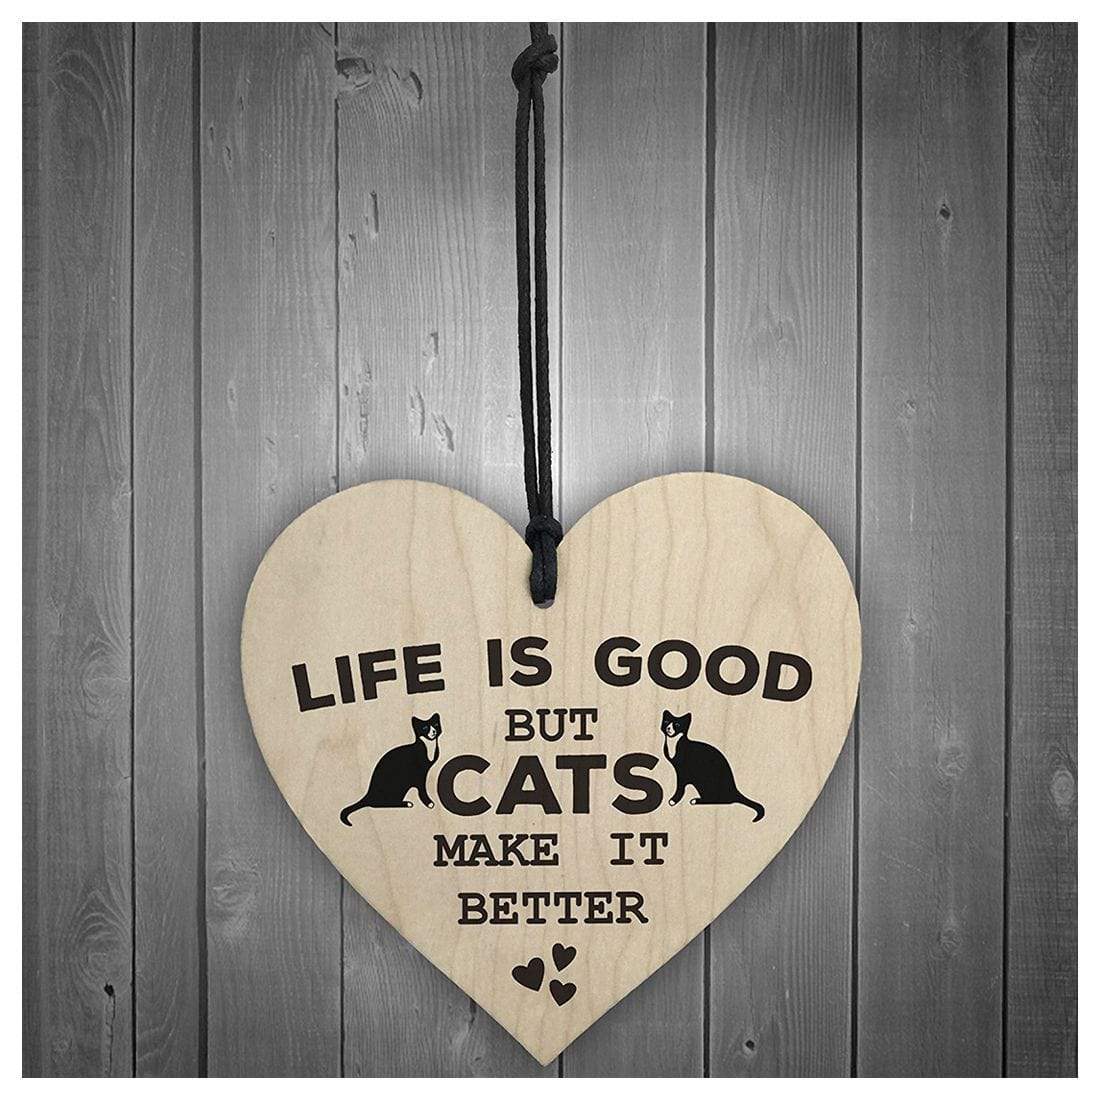 Cat House Sign Made of Wood and Engraved with the Words "Life Is Good But Cats Make It Better"